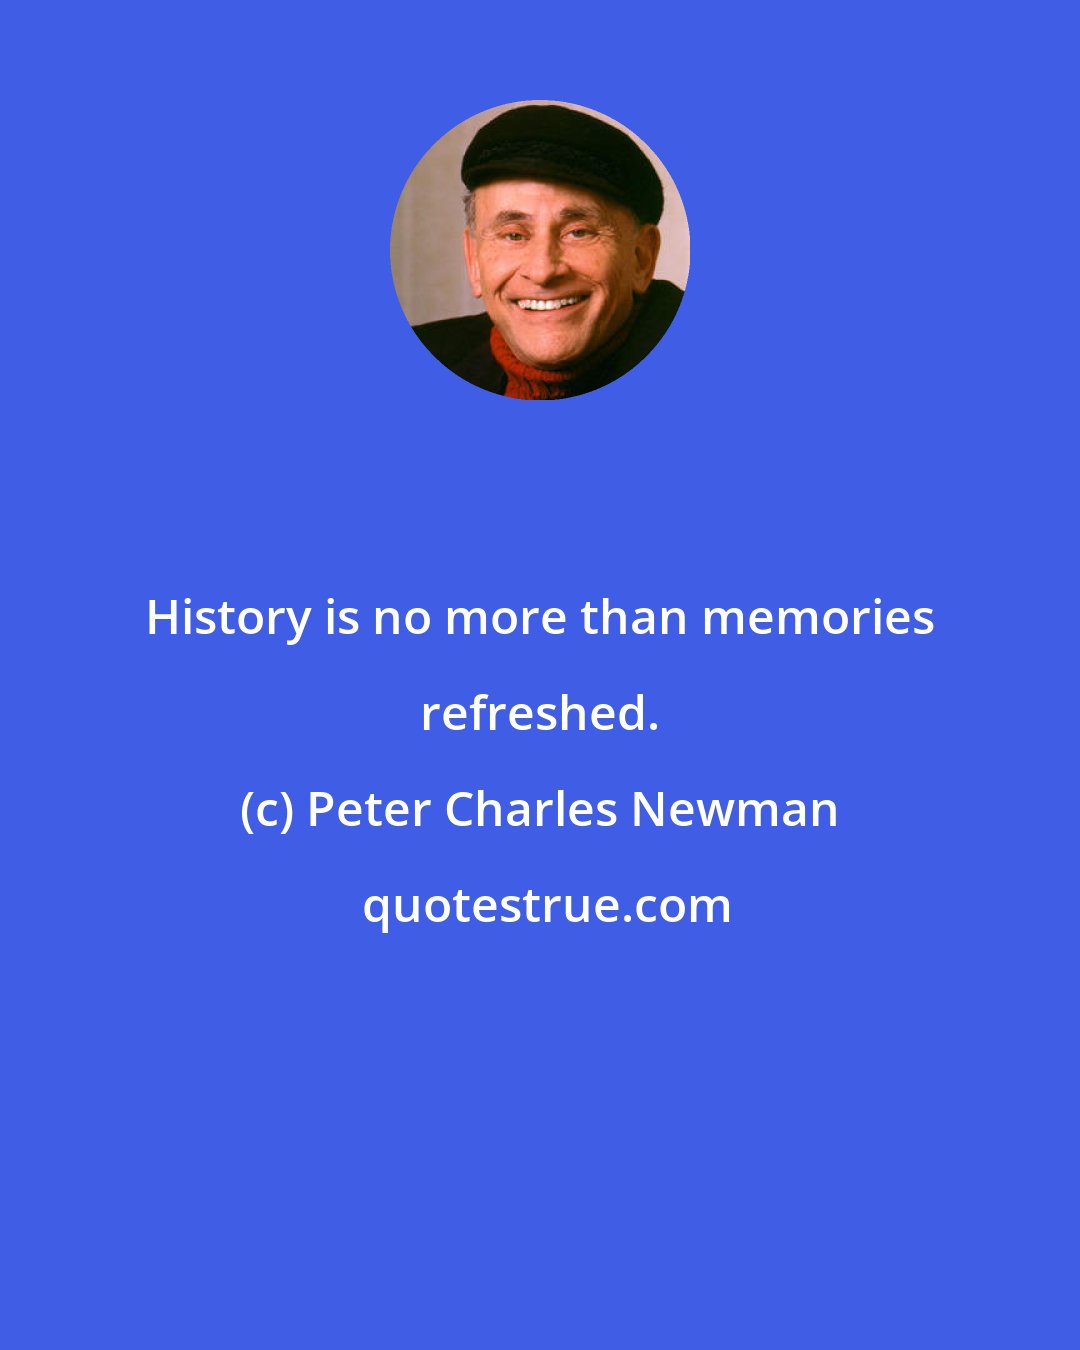 Peter Charles Newman: History is no more than memories refreshed.